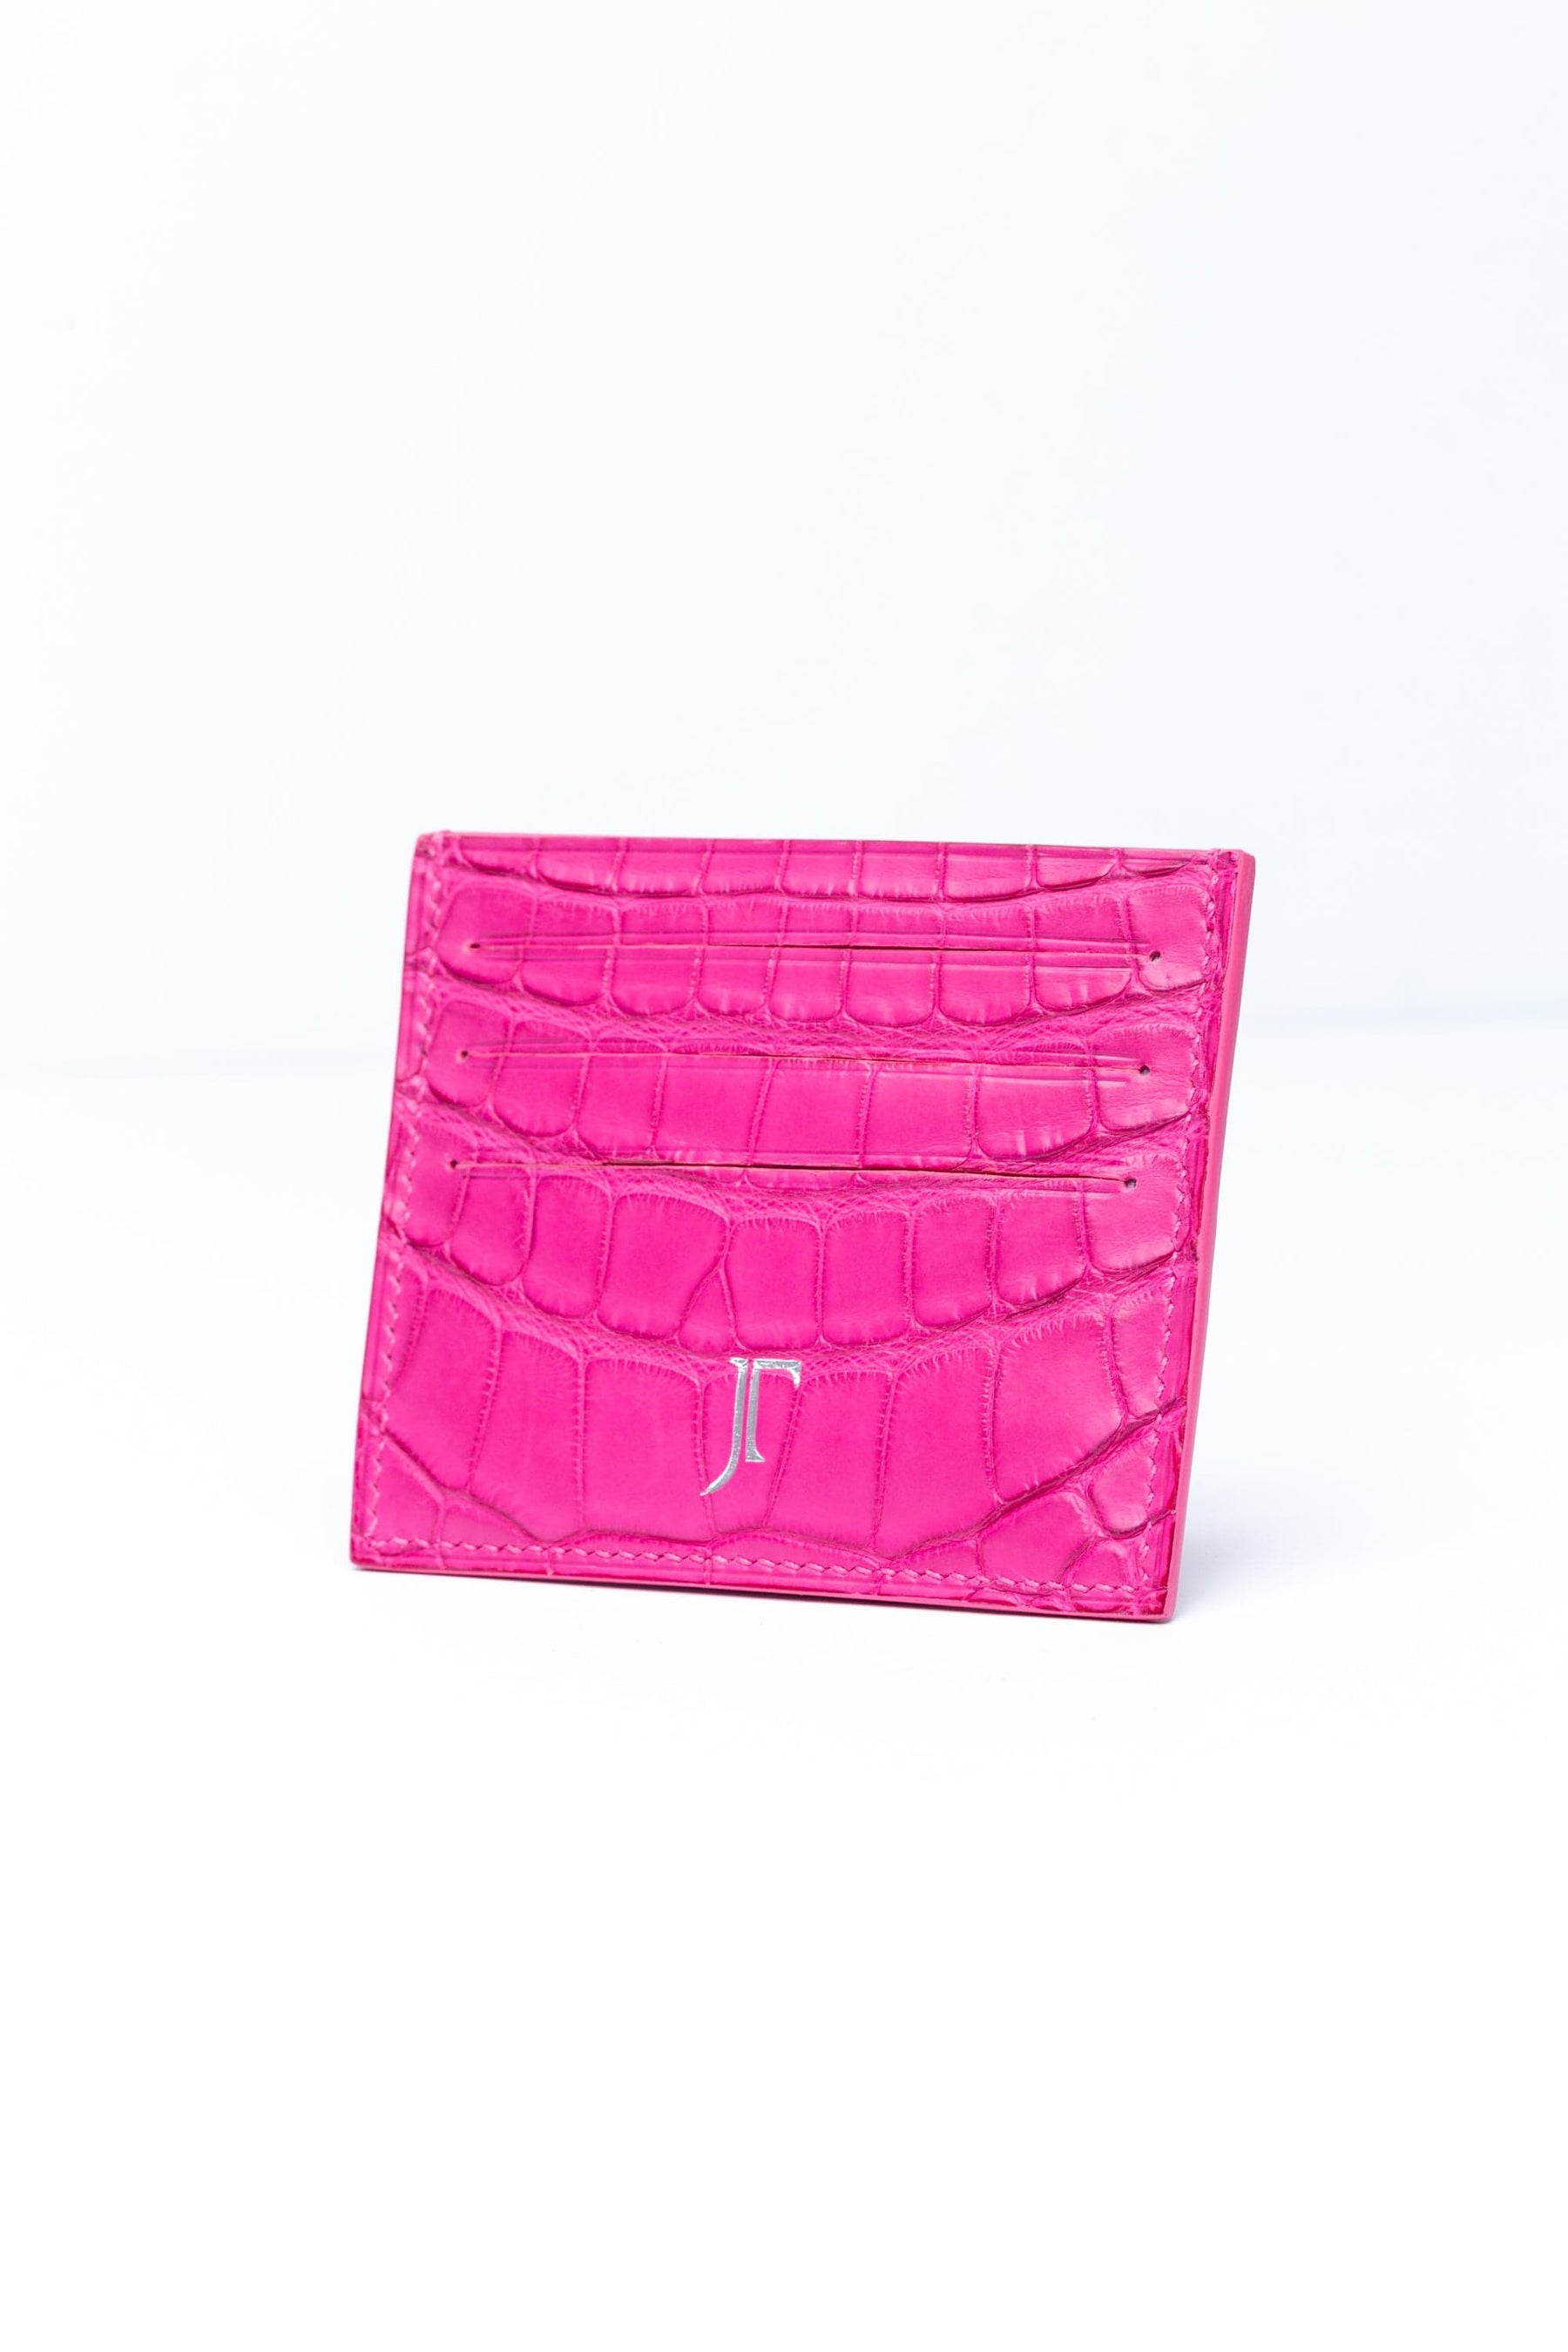 Tamagini Leather | The Endicott Bungus Card Wallet Edition - Pink Hot